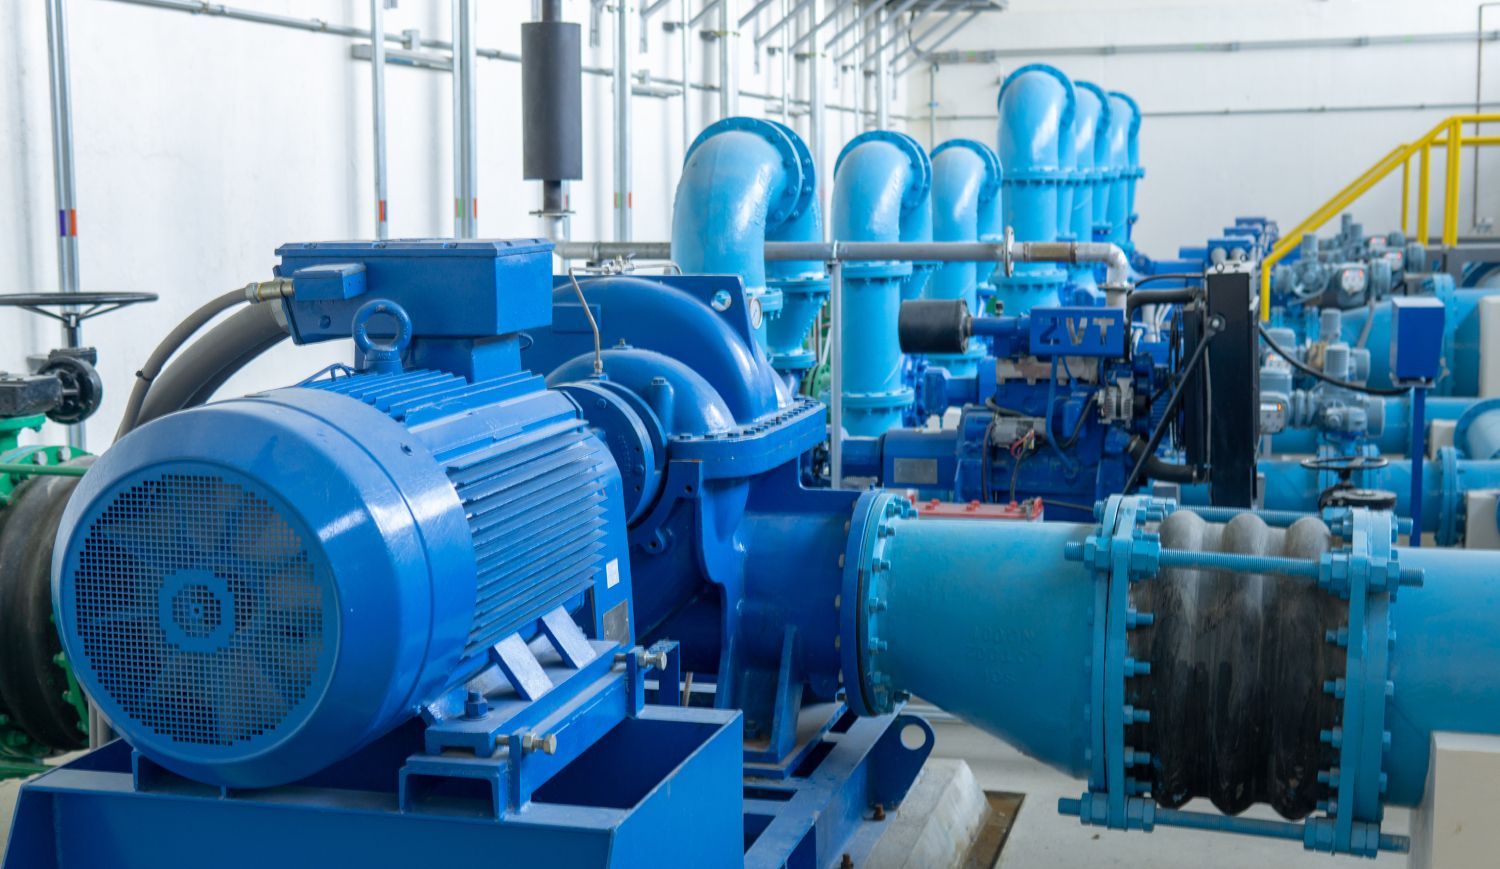 a room filled with lots of blue machinery and pipes